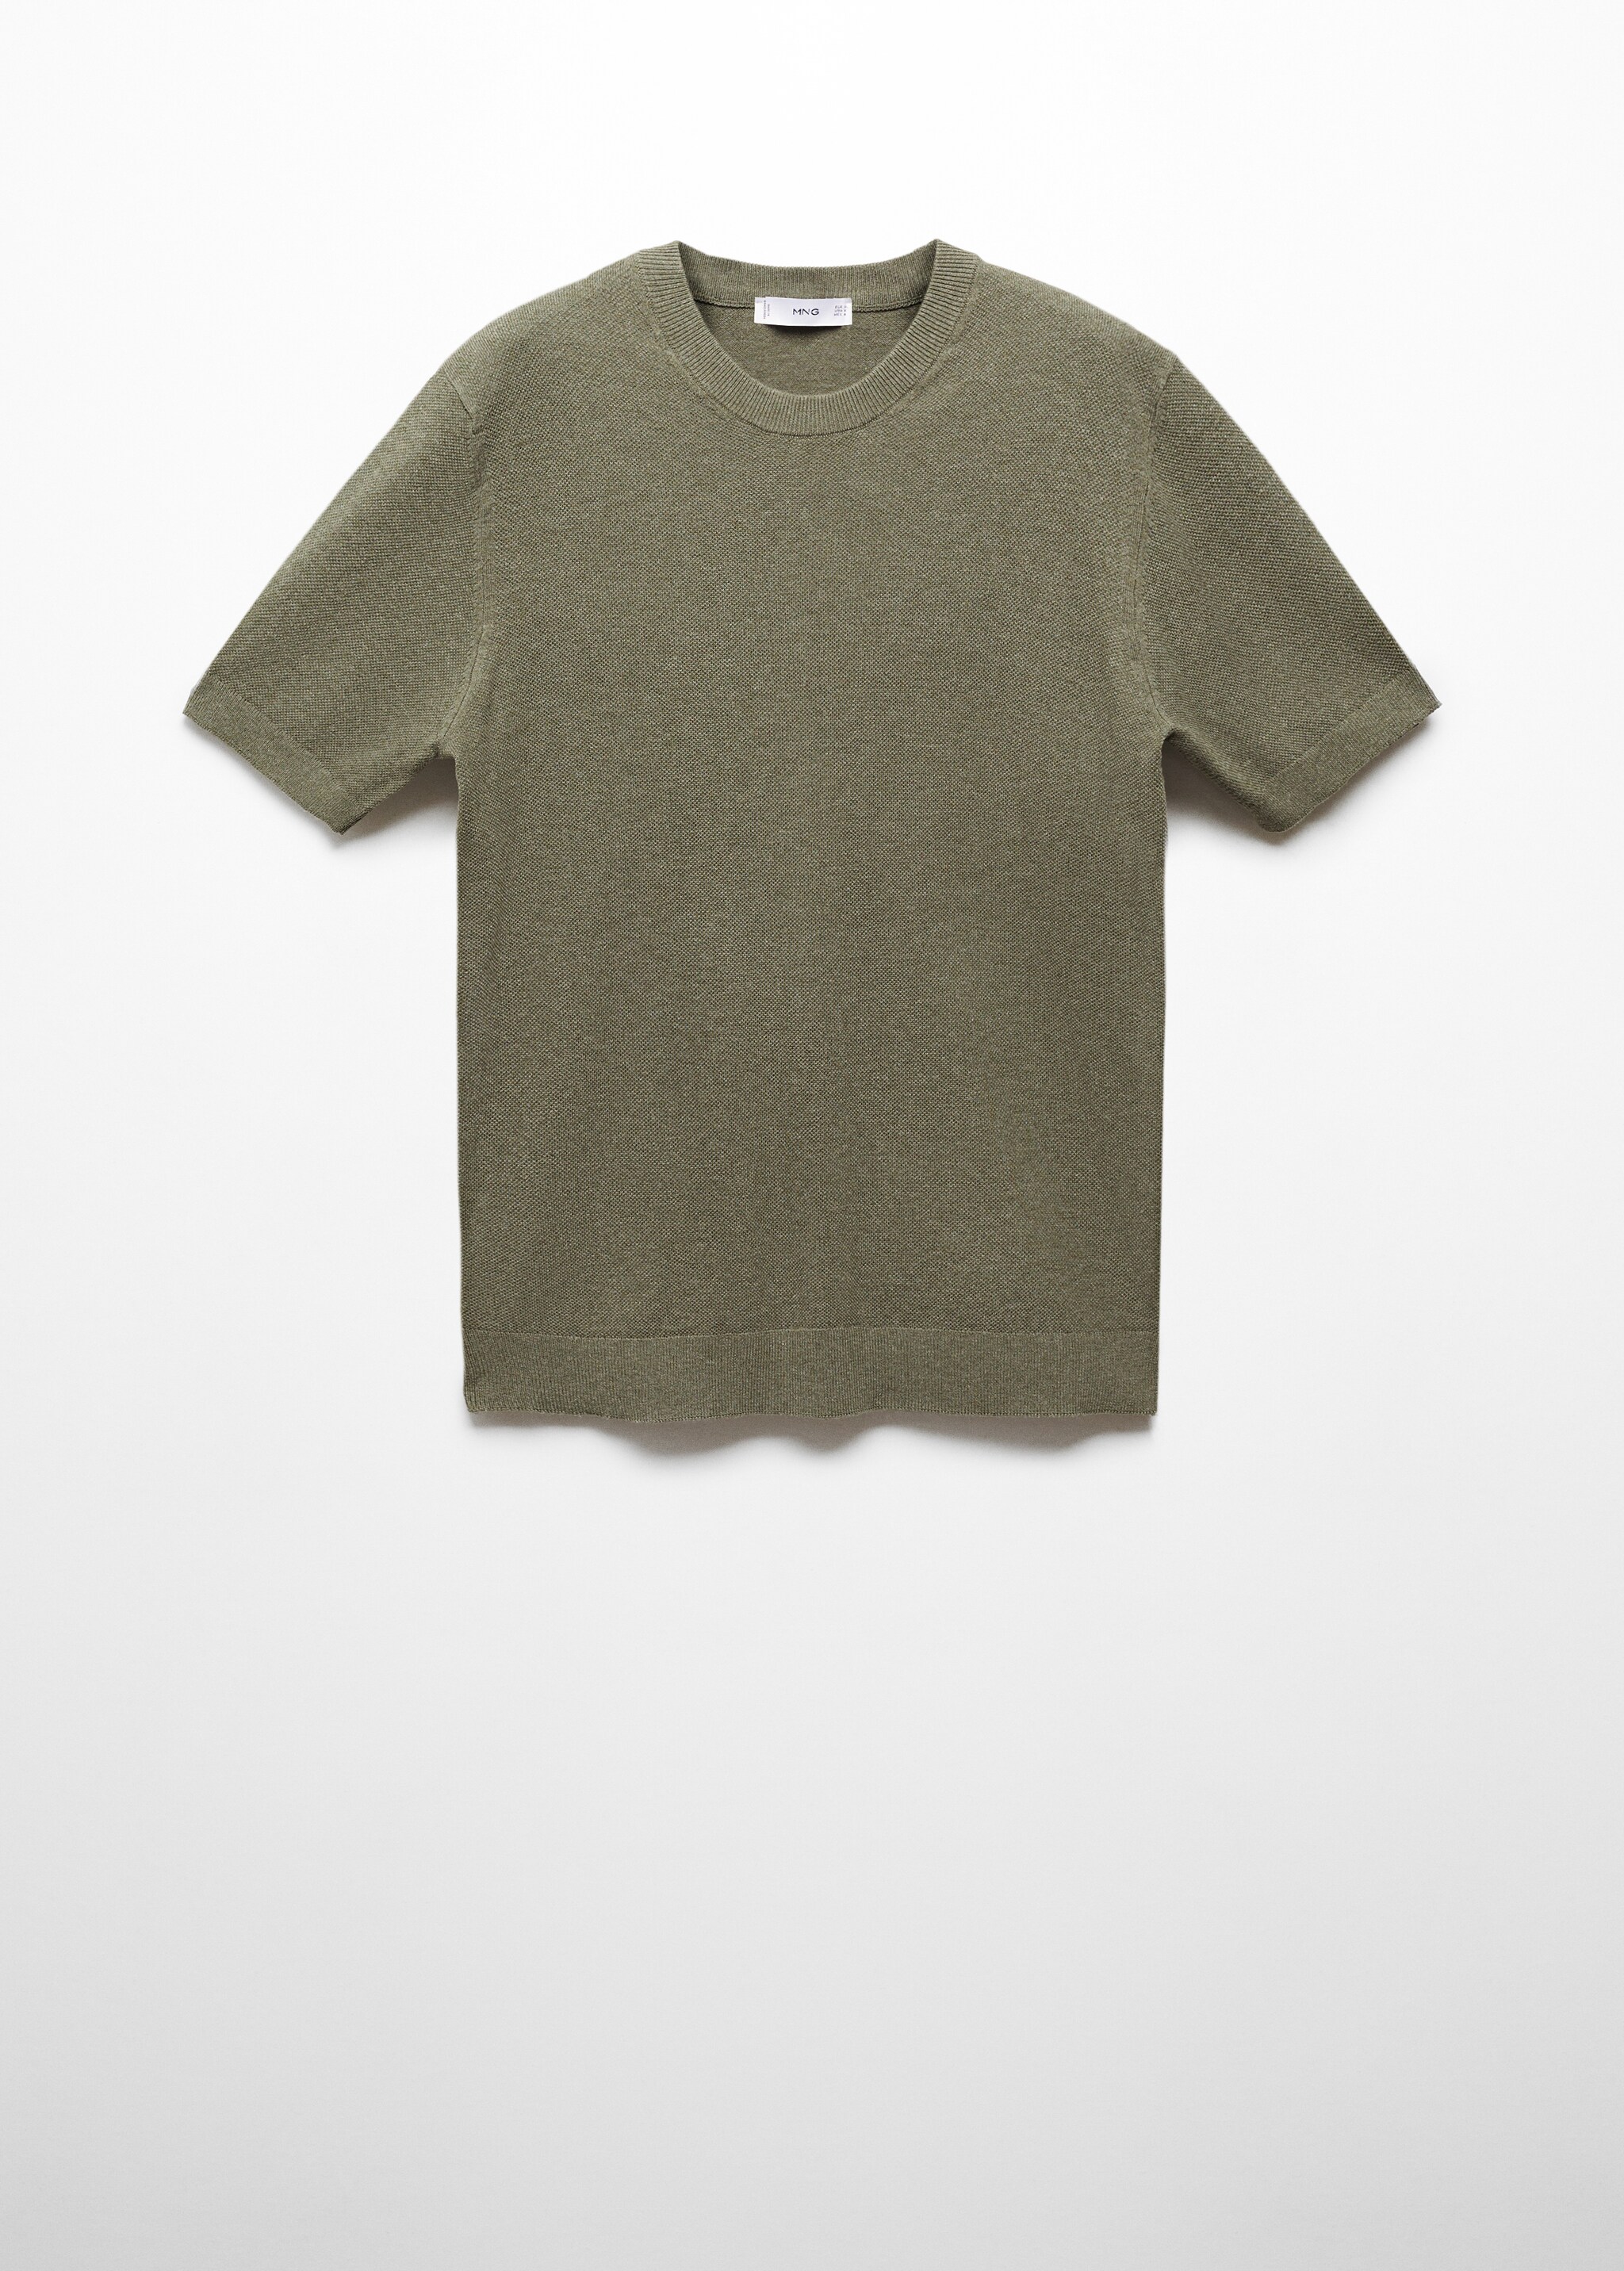 Structured cotton knit t-shirt - Article without model